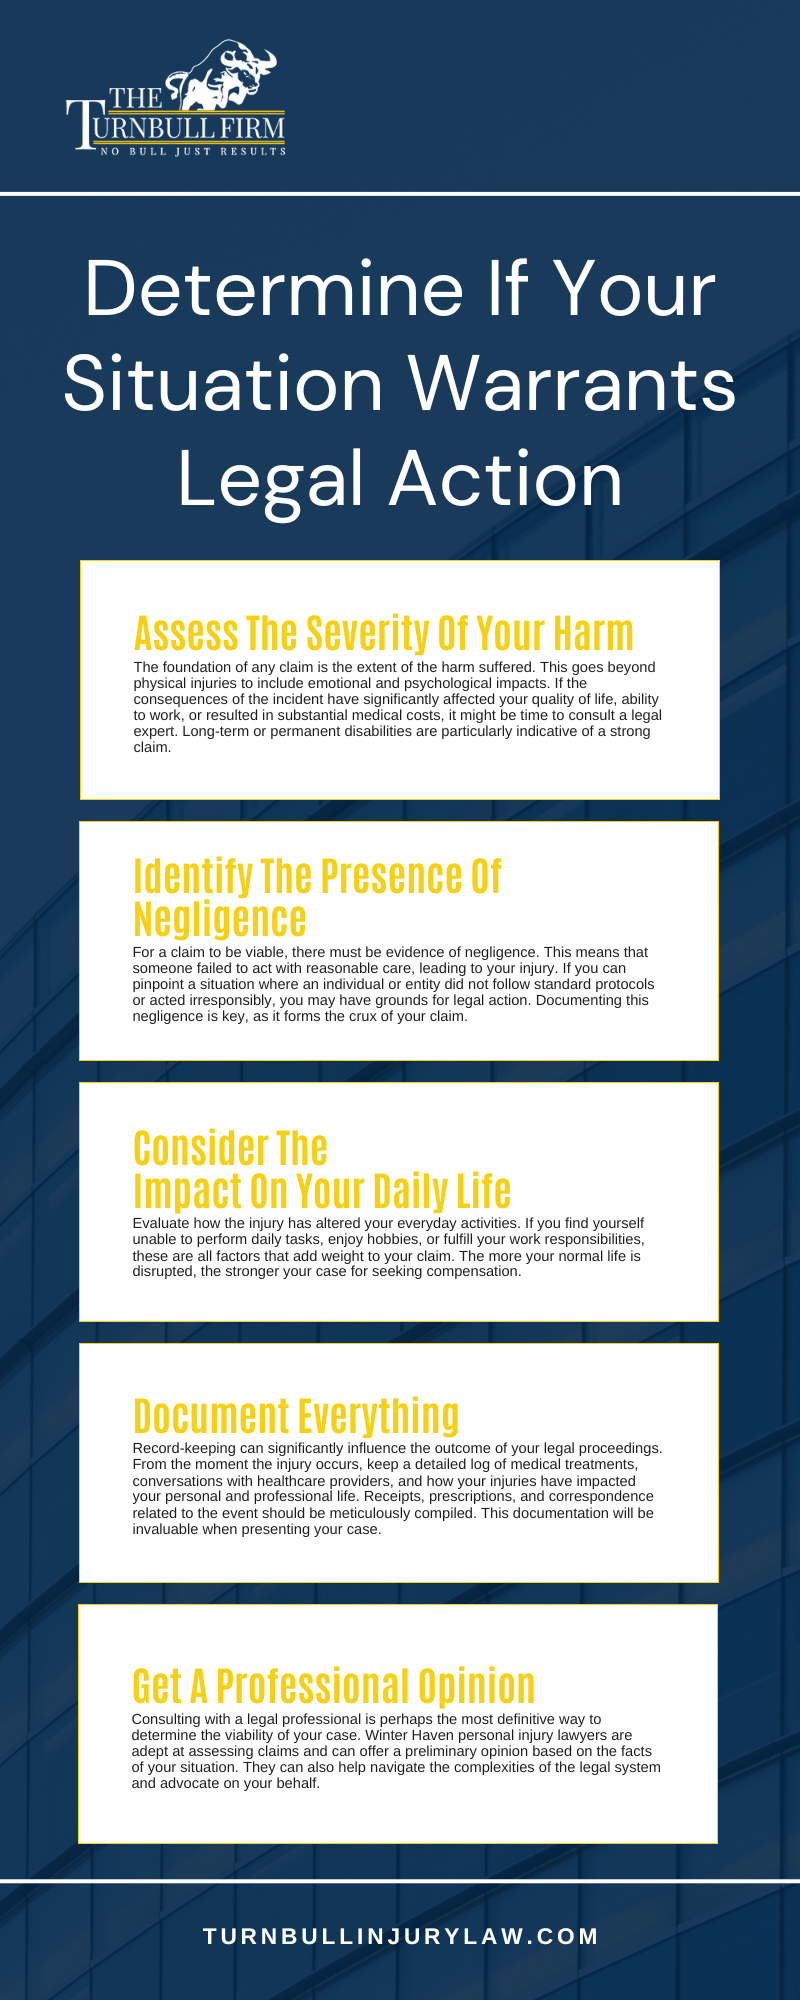 Determine If Your Situation Warrants Legal Action Infographic